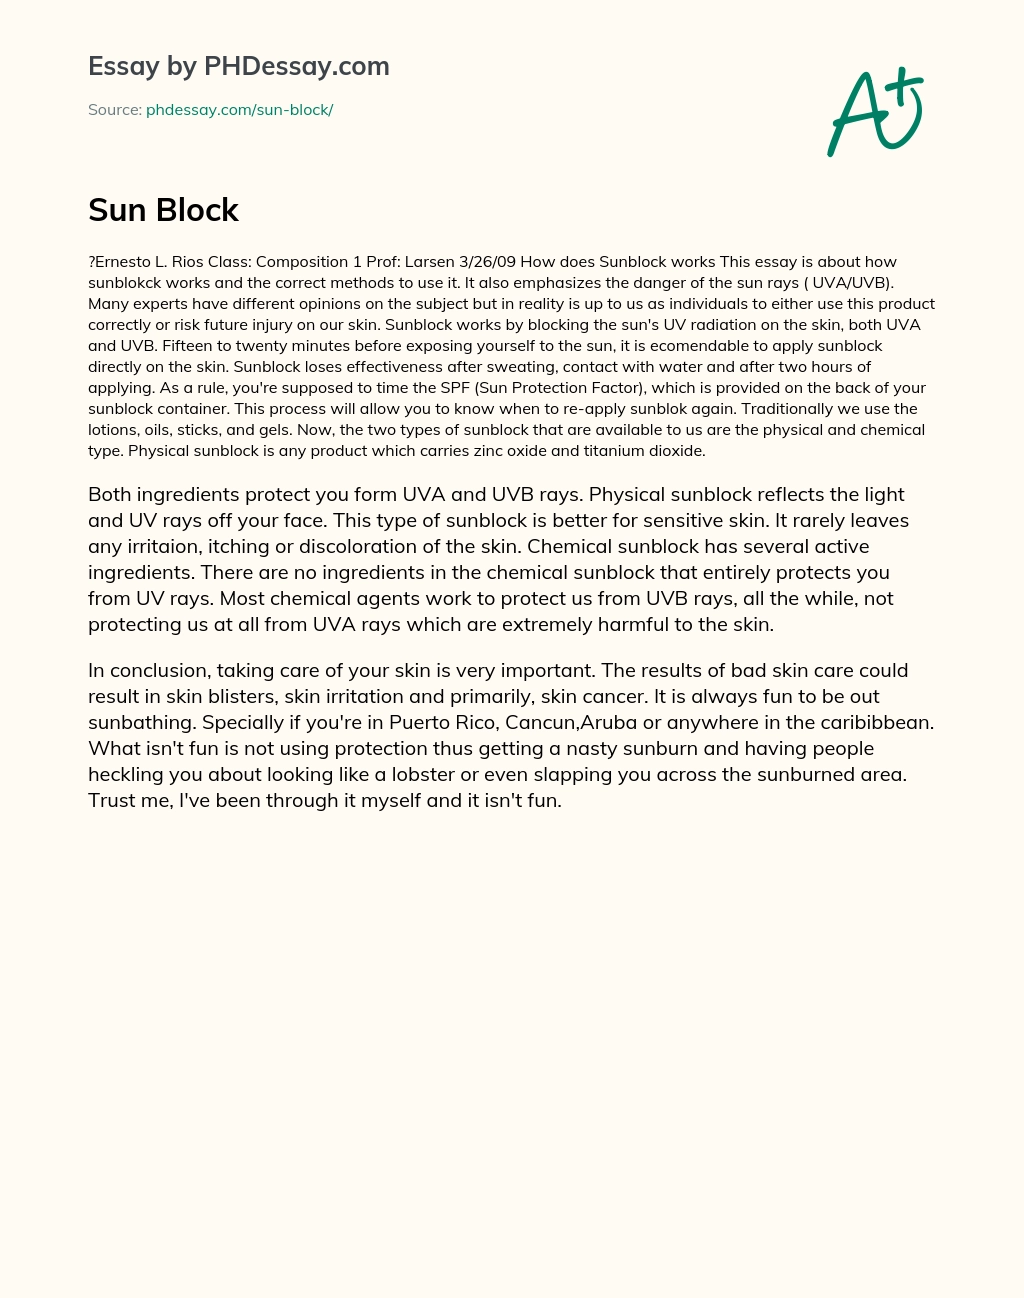 portant: Understanding Sunblock and its Correct Use essay